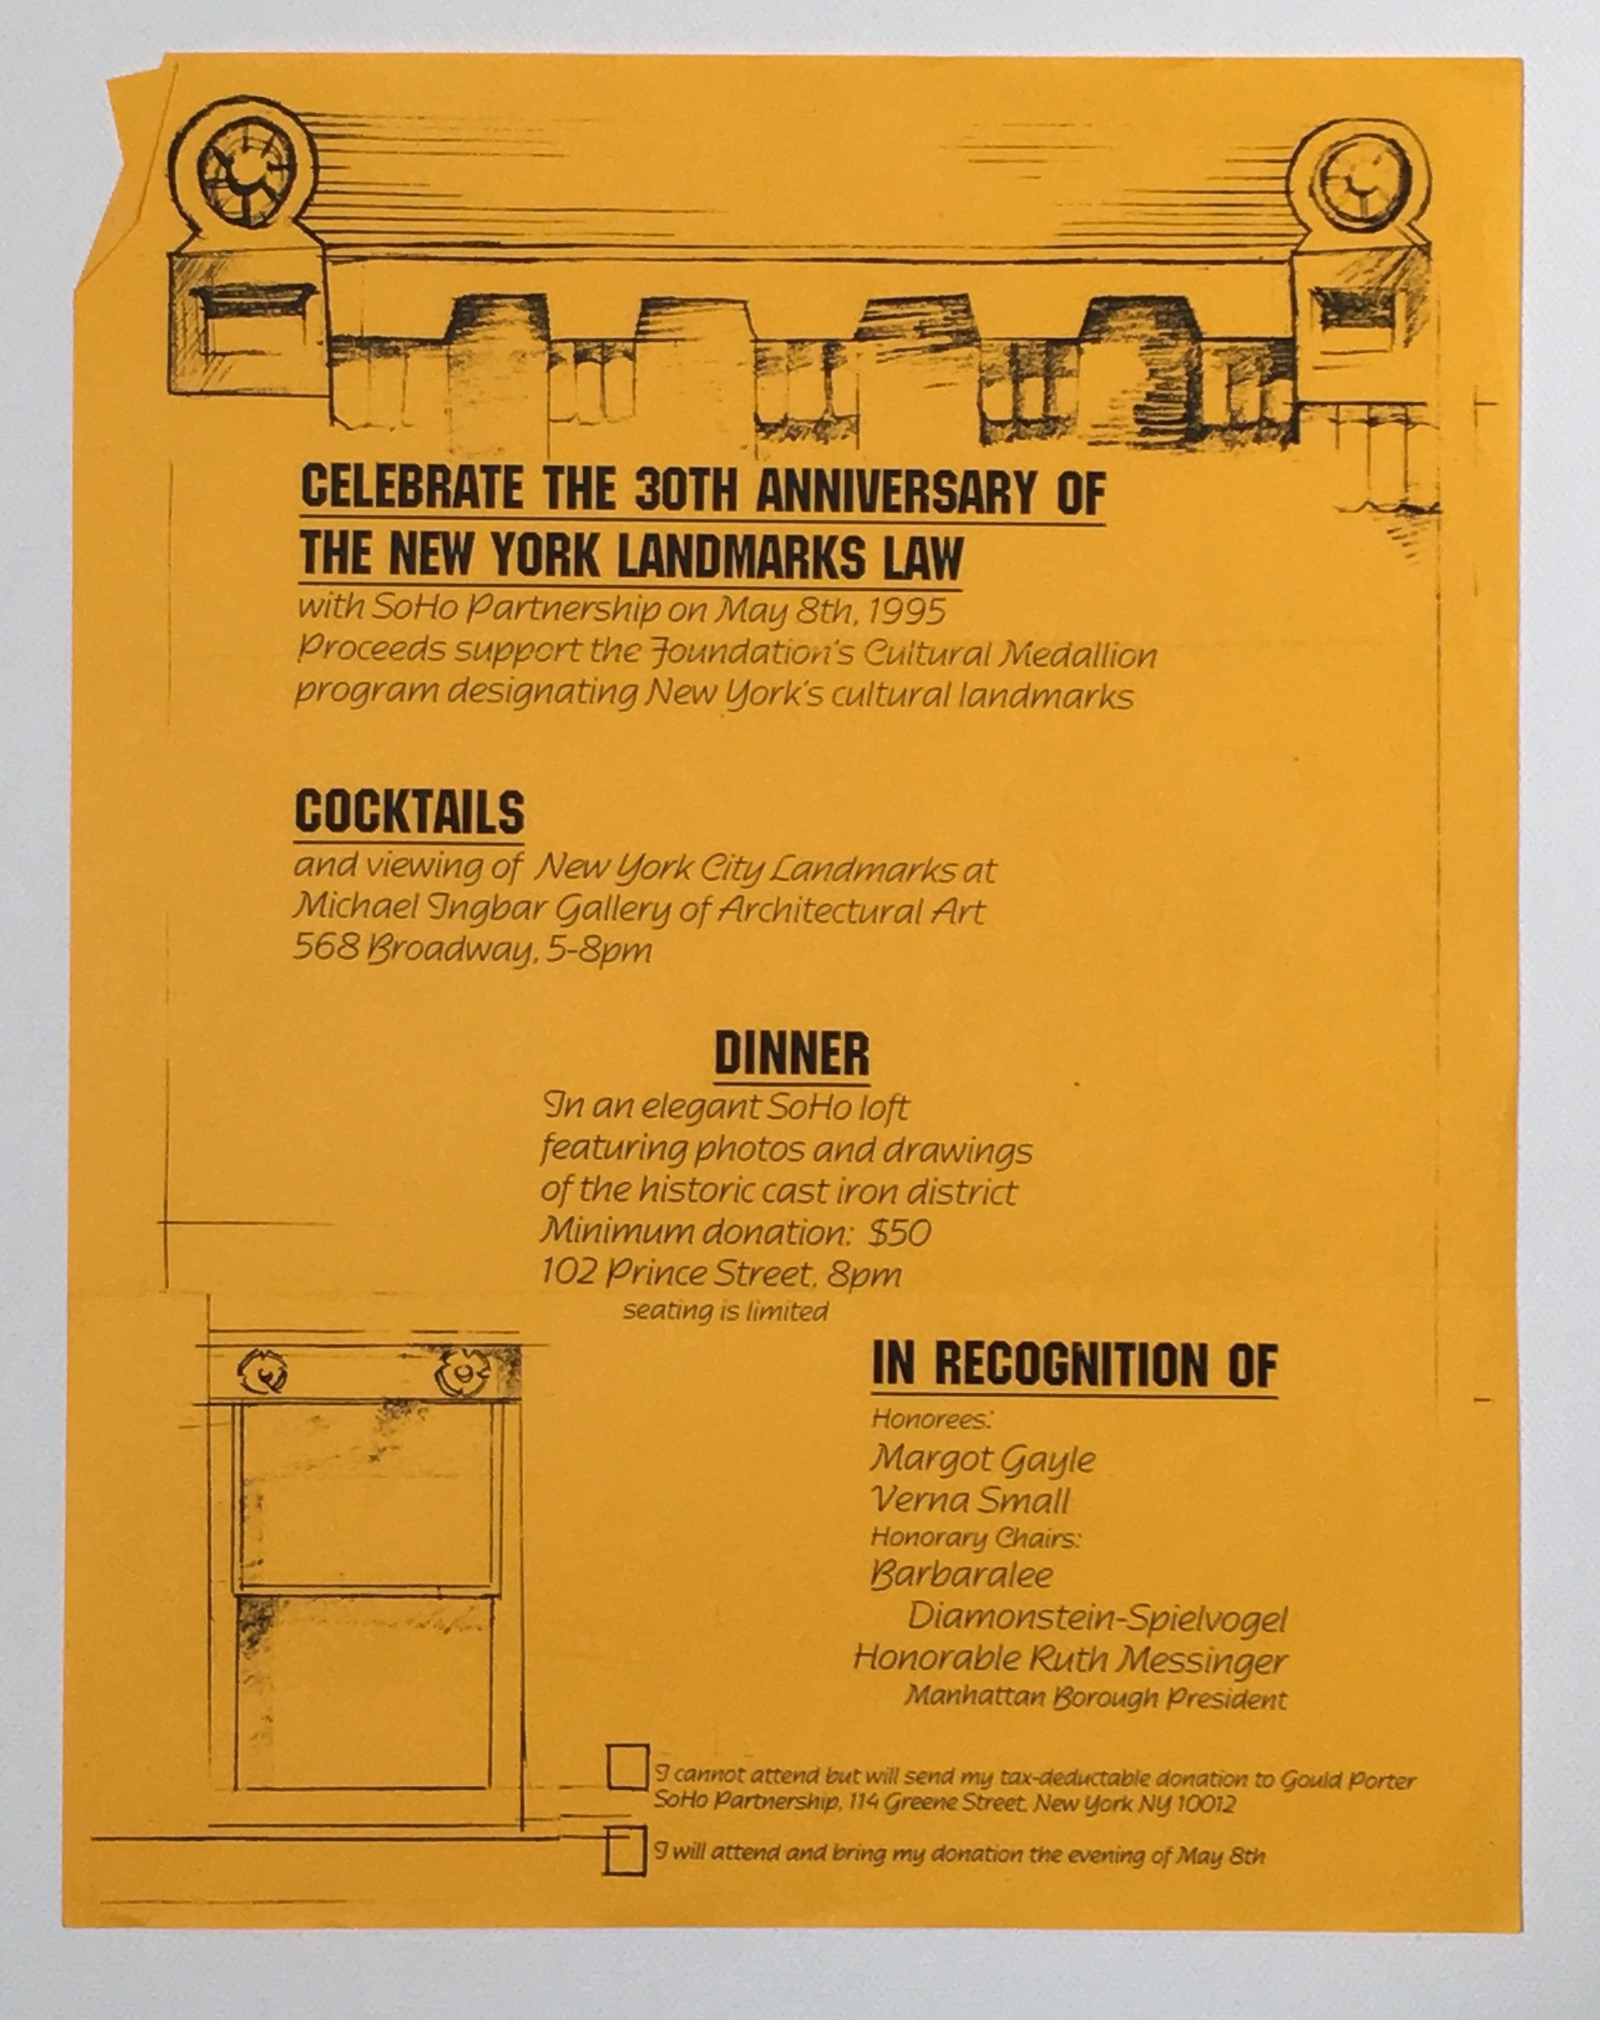 Celebrate the 30th Anniversary of the New York Landmarks Law